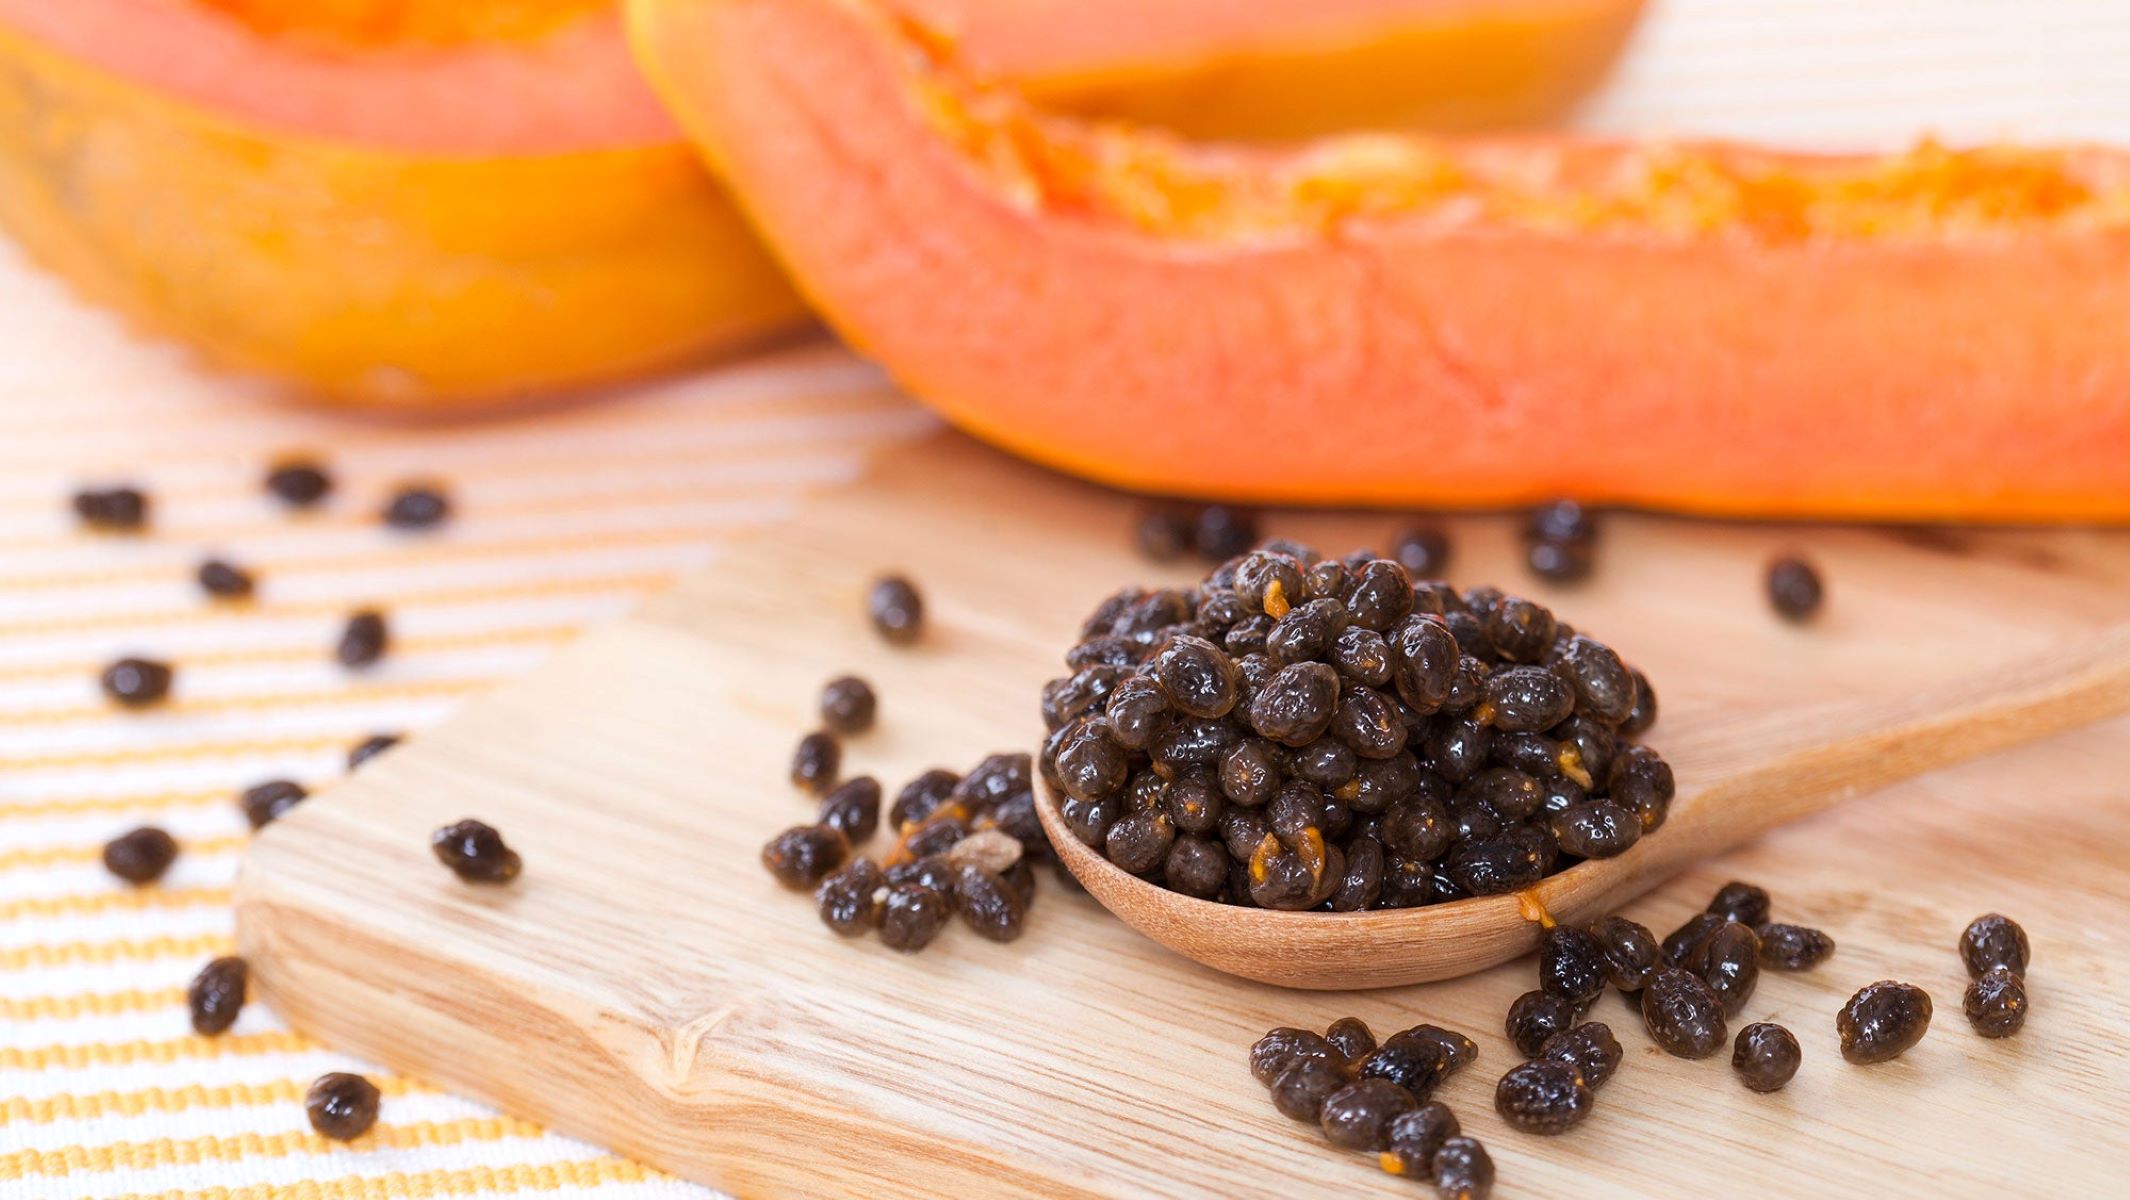 What Can Papaya Seeds Be Used For